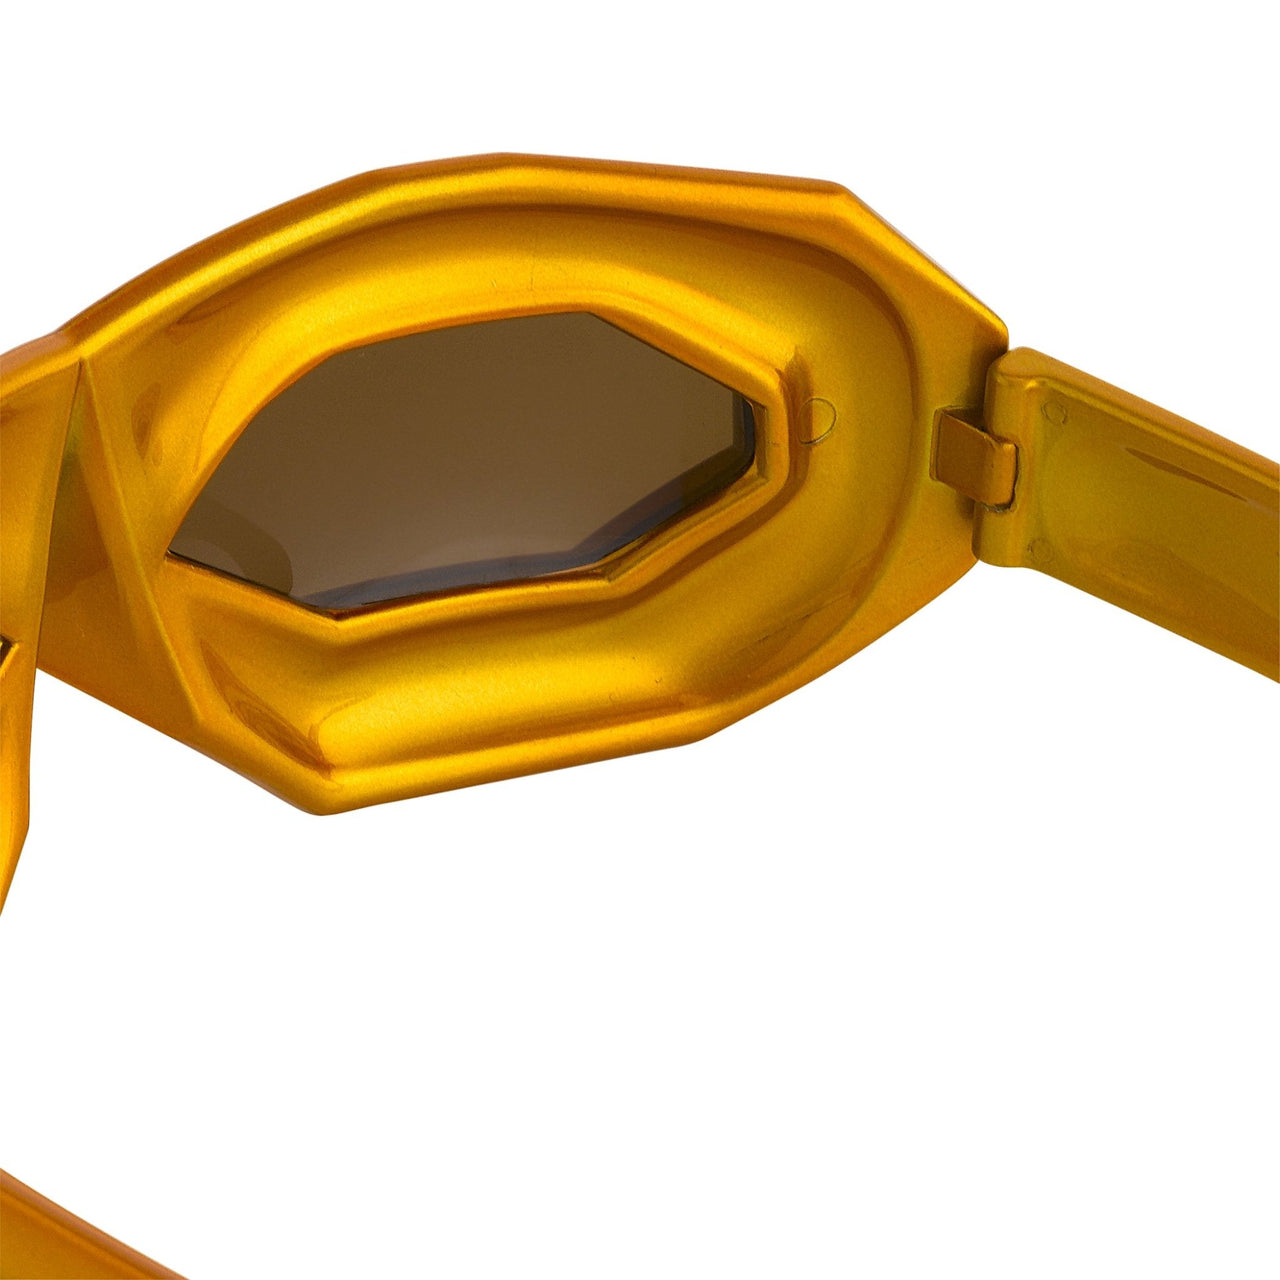 Walter Van Beirendonck Sunglasses Special Shiny Gold and Brown – Watches &  Crystals